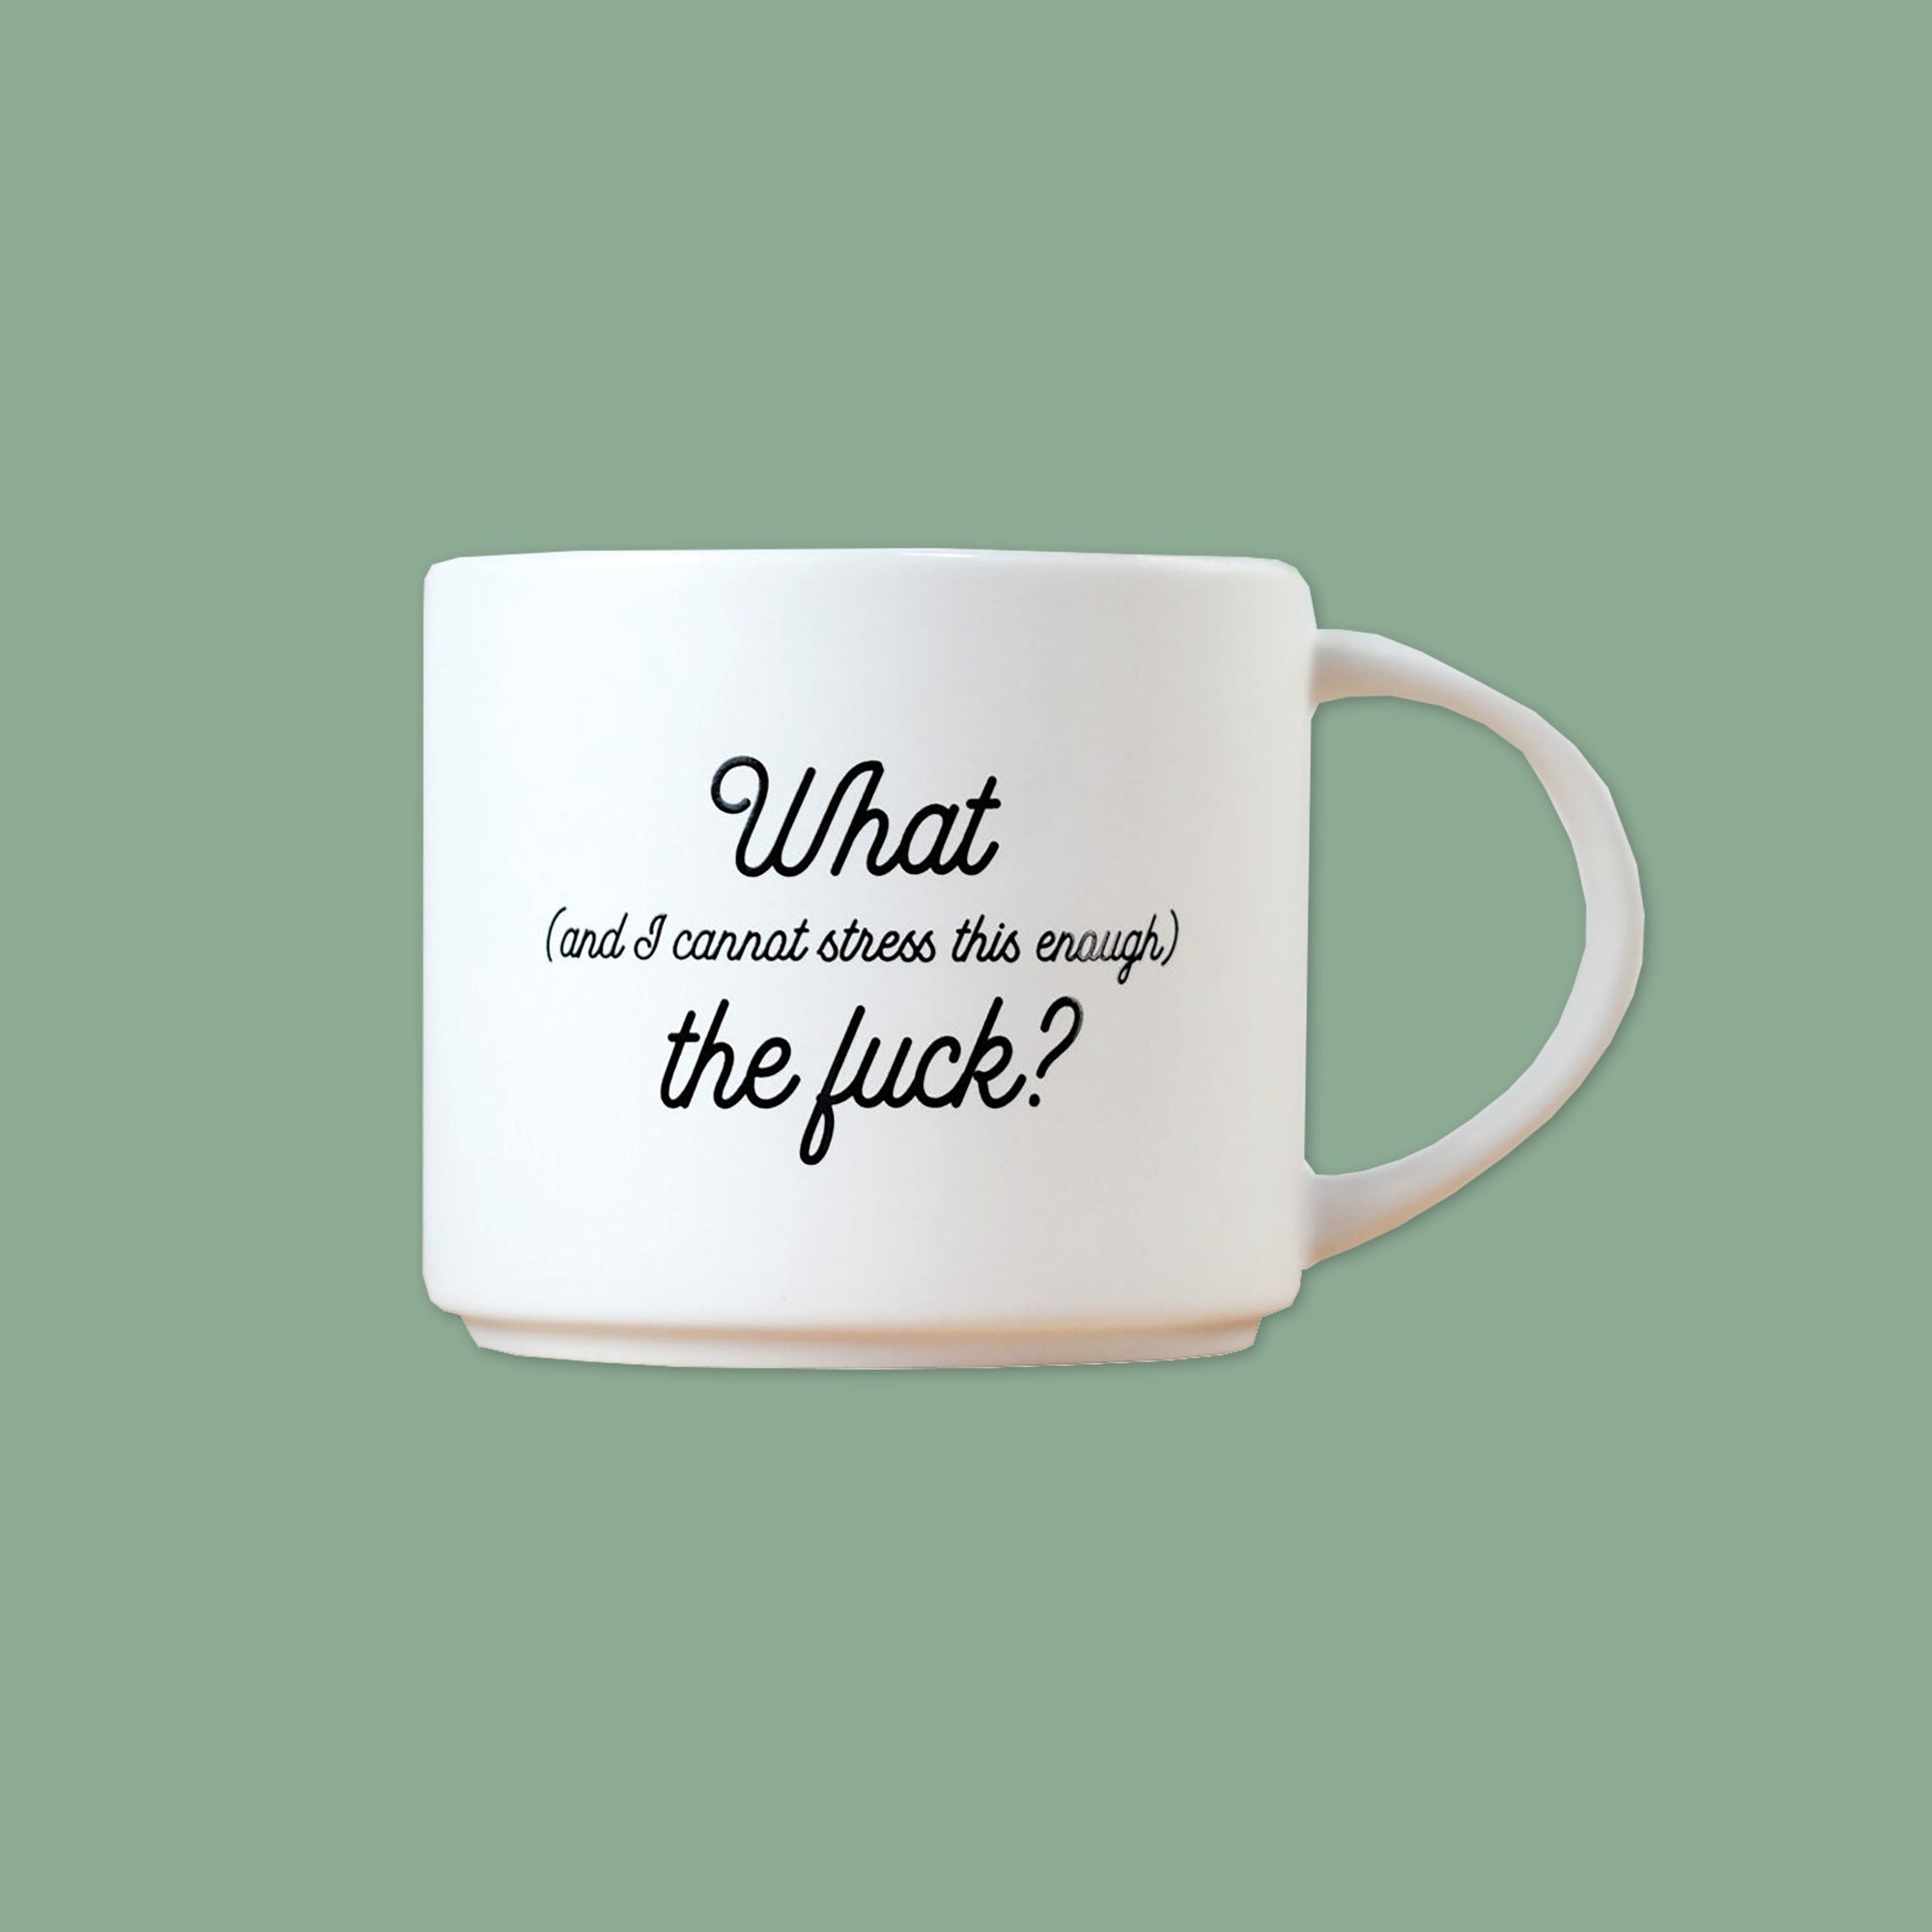 On a moss green background sits a mug. This white mug says "What (and I cannot stress this enough) the fuck?" in black script font.